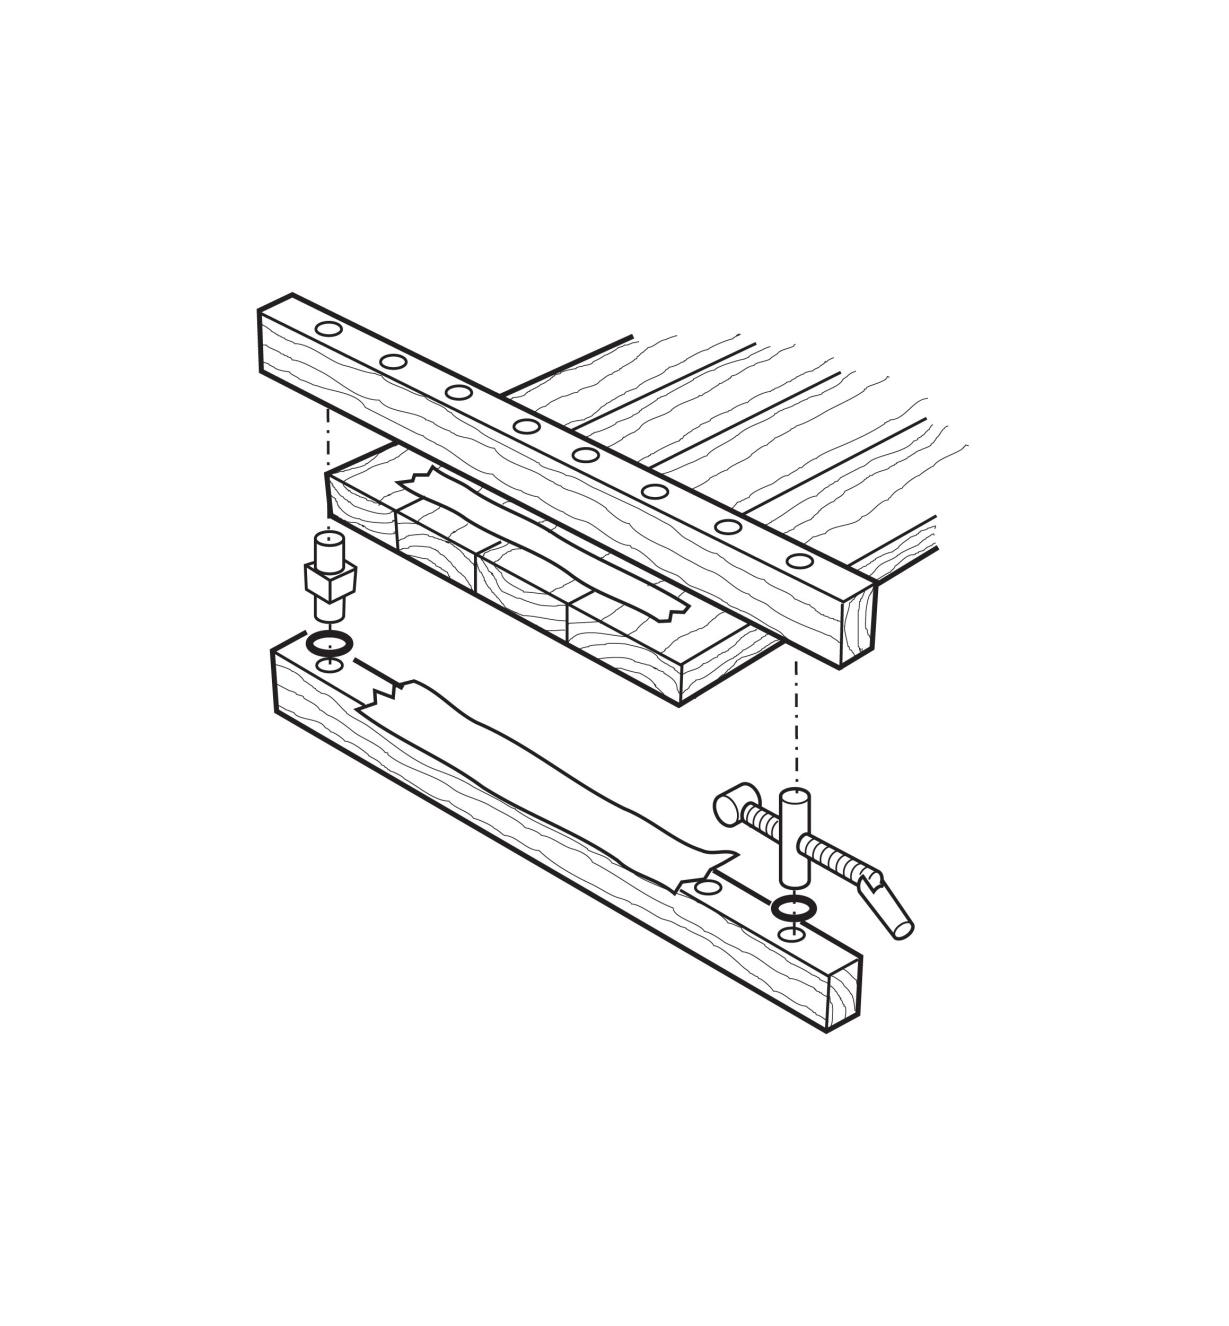 Exploded diagram shows how a panel clamp and two shop-made bars clamp a panel